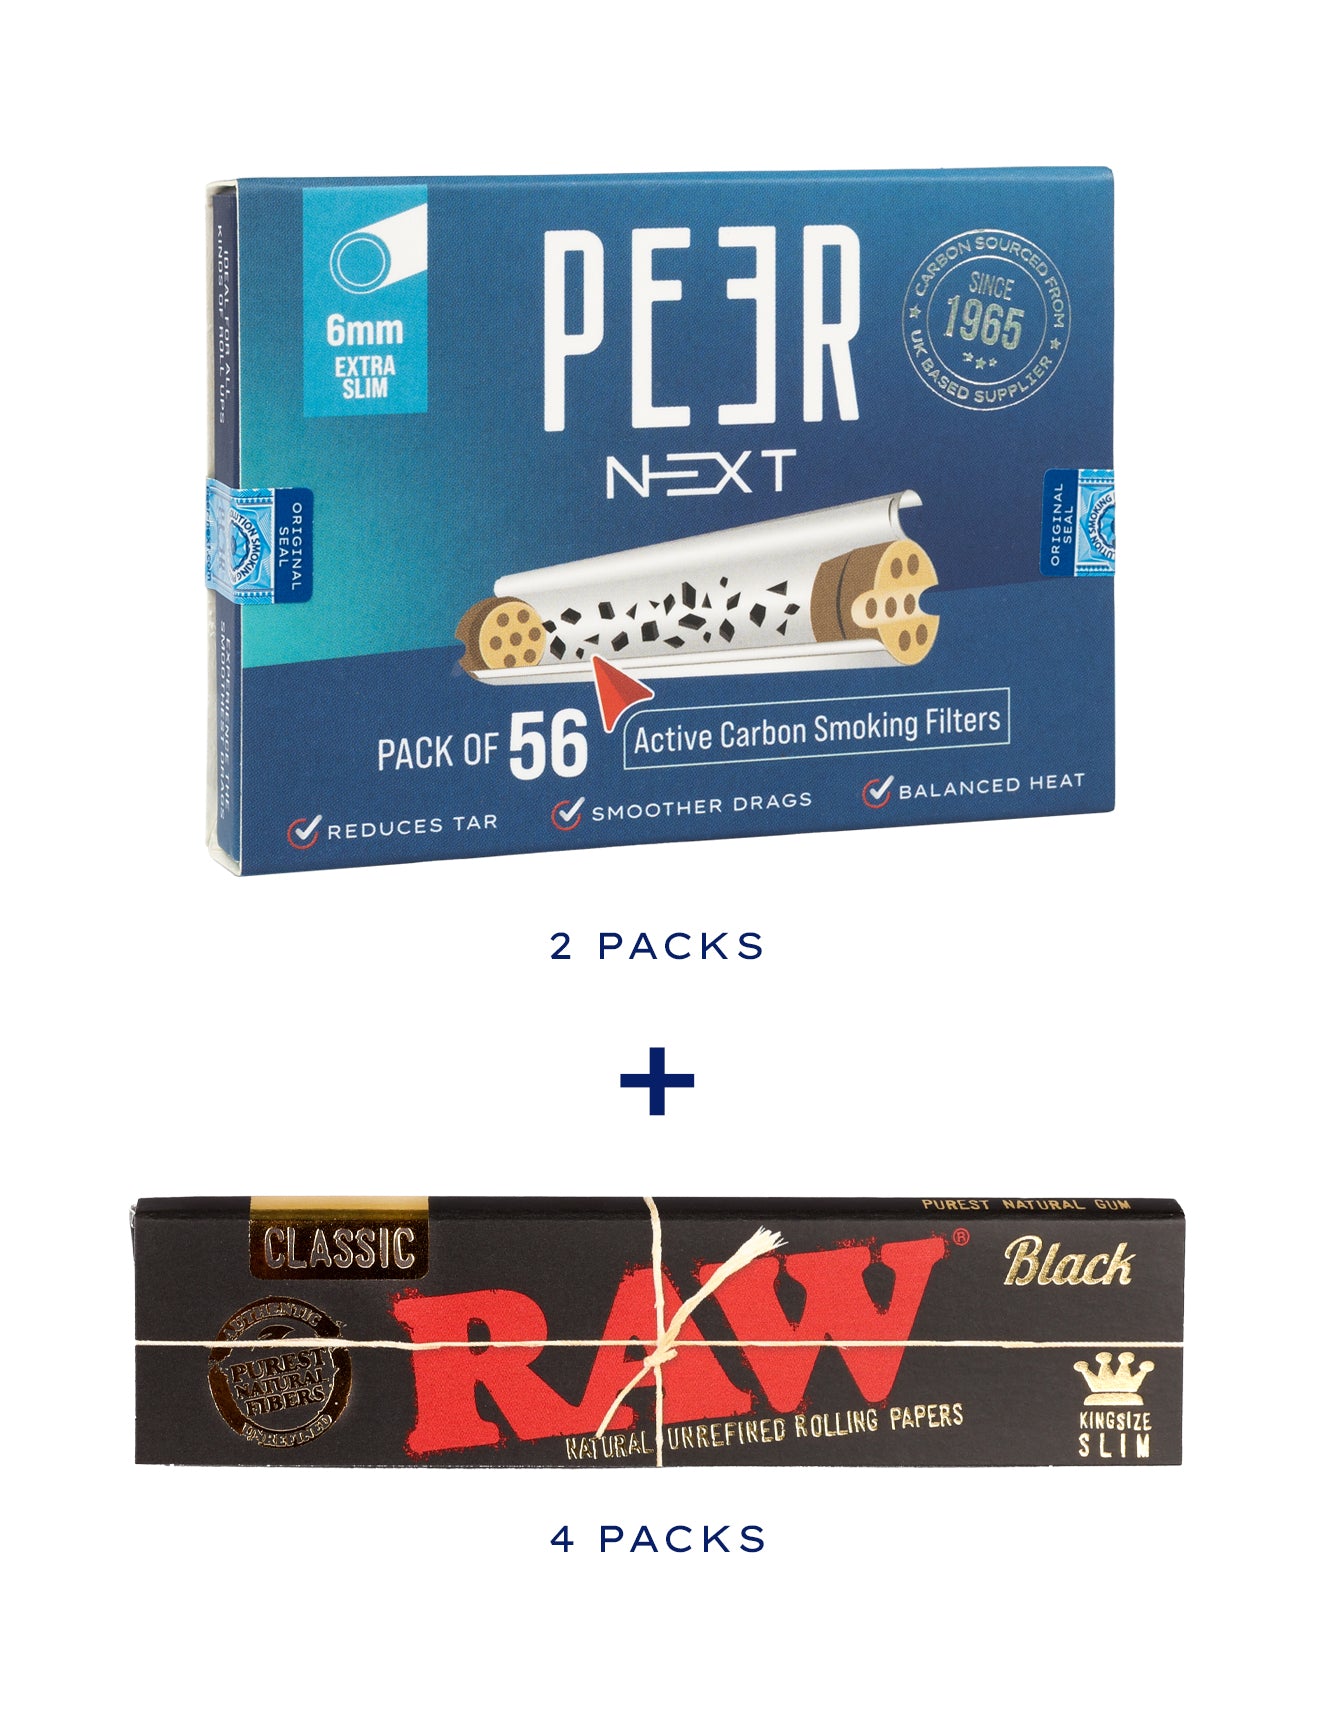 PEER Next combo pack of active carbon smoking filters and 4 RAW Black rolling paper